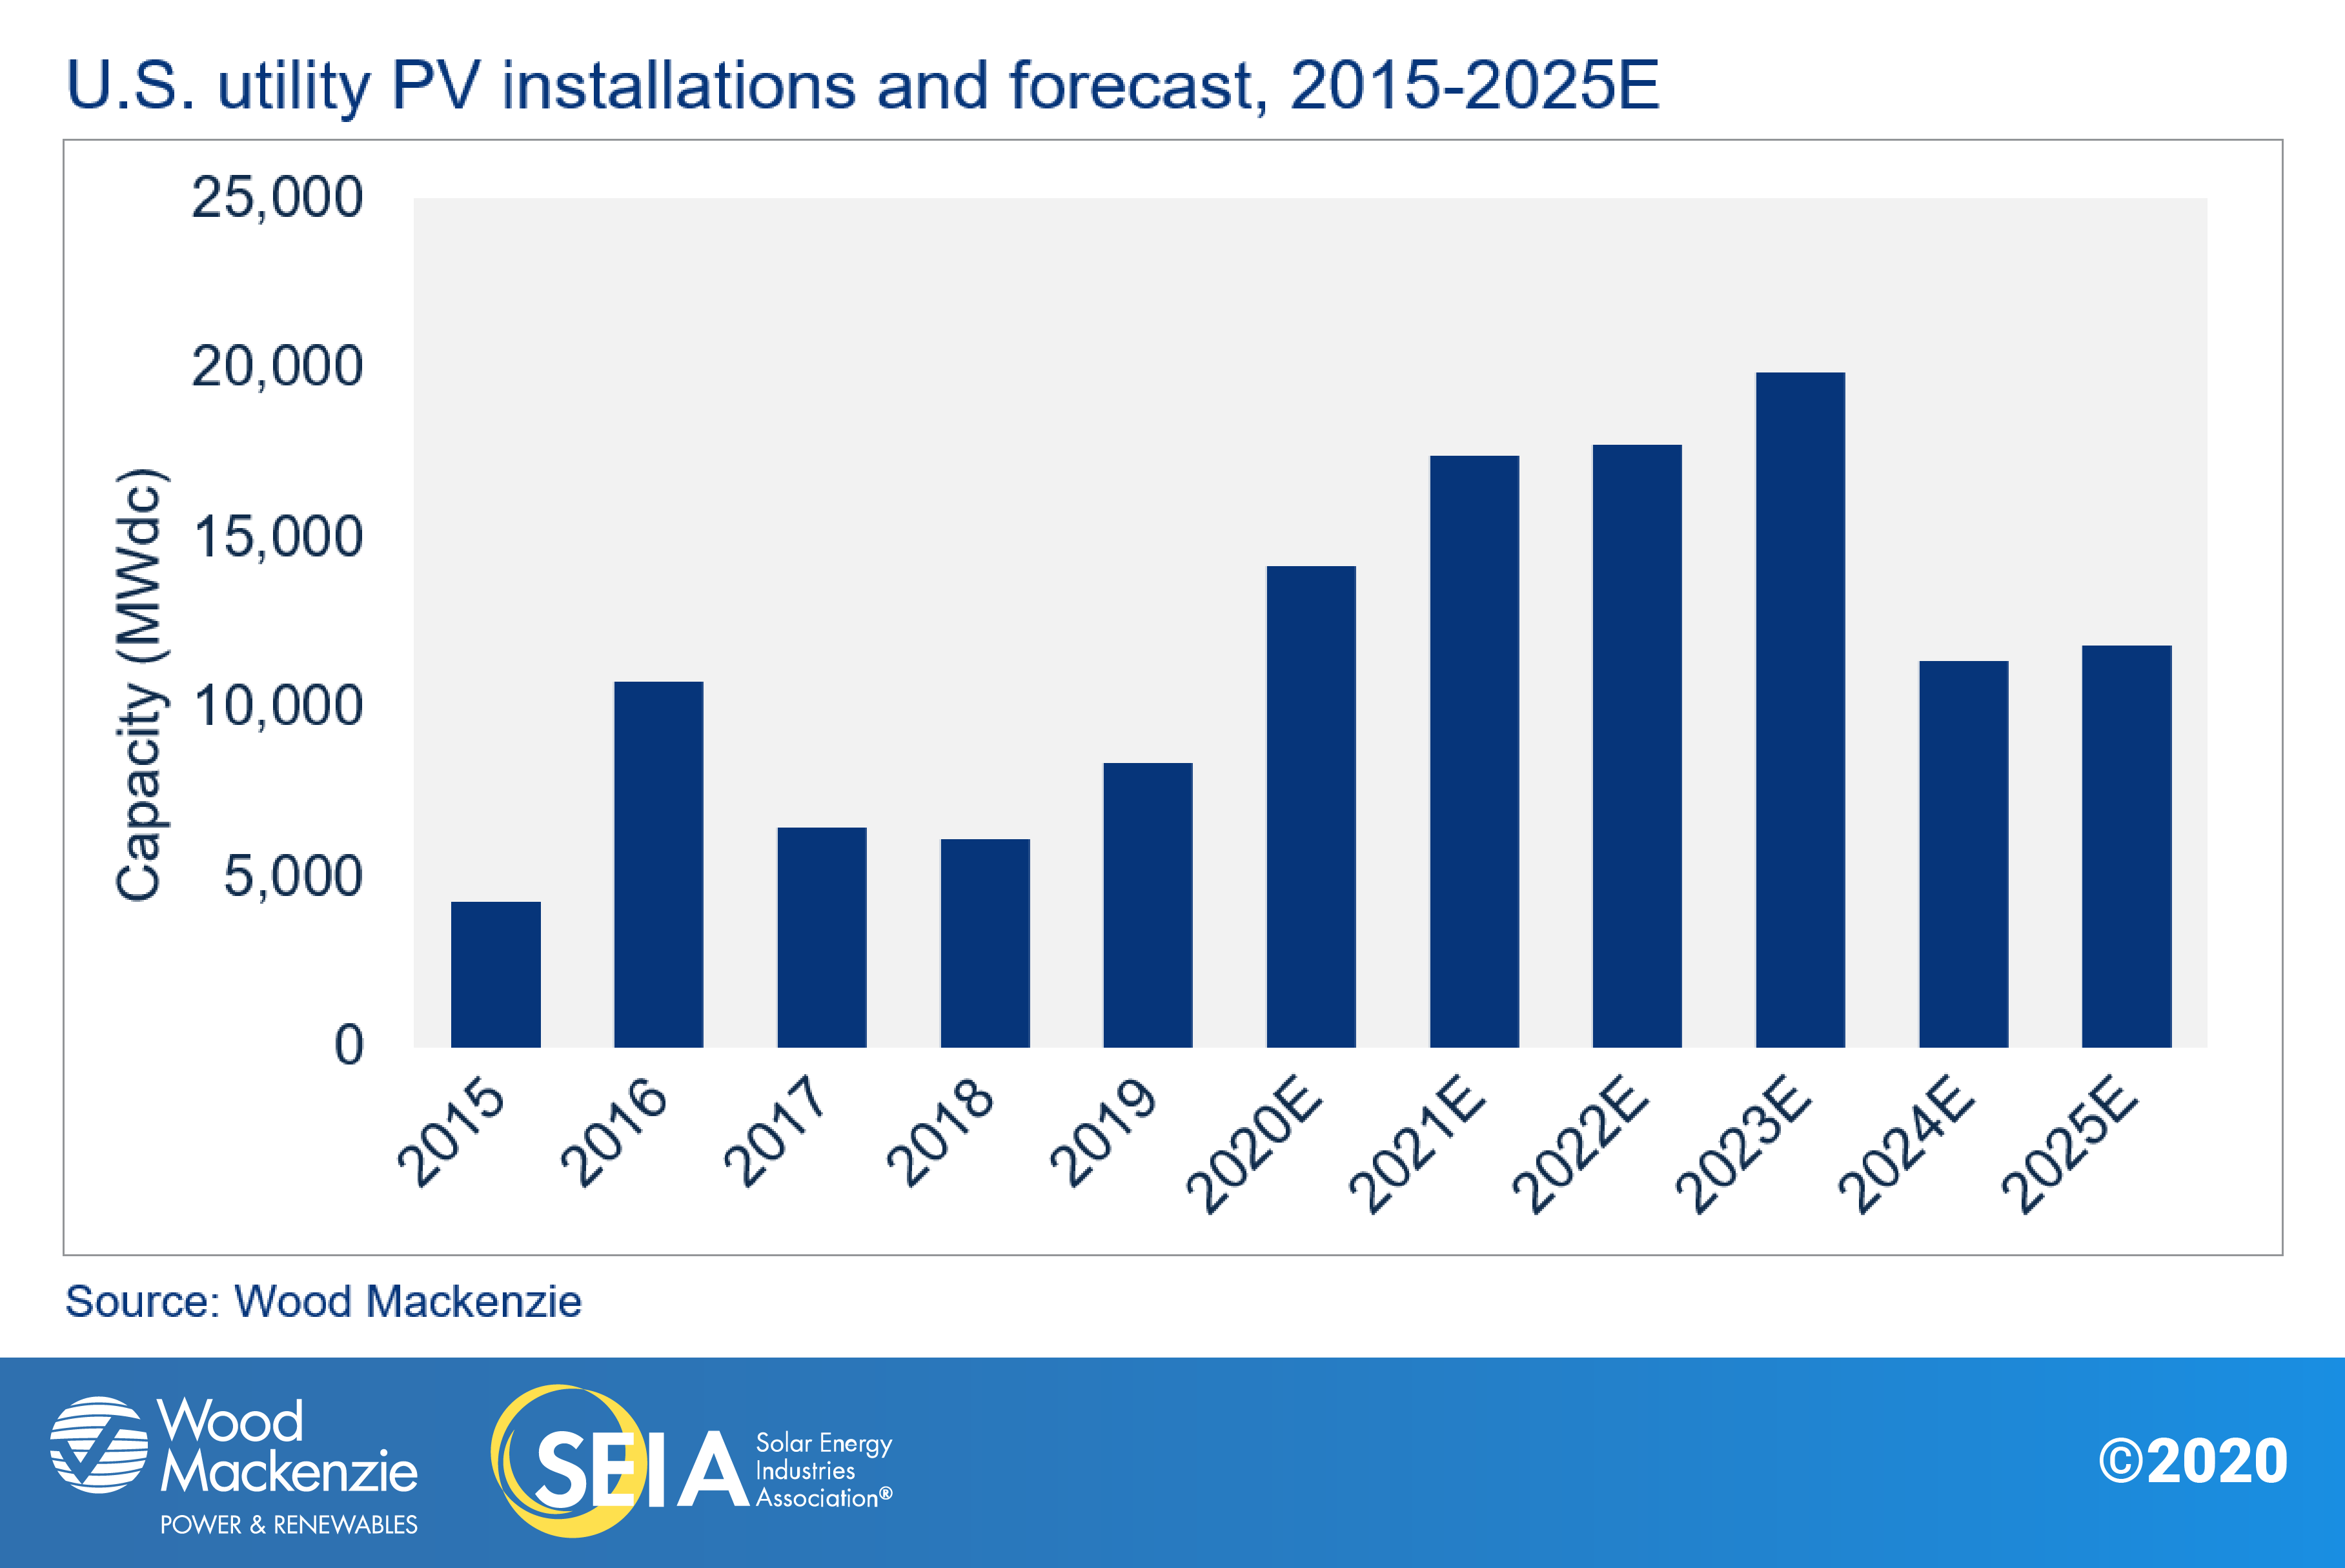 U.S. utility PV installations and forecast chart